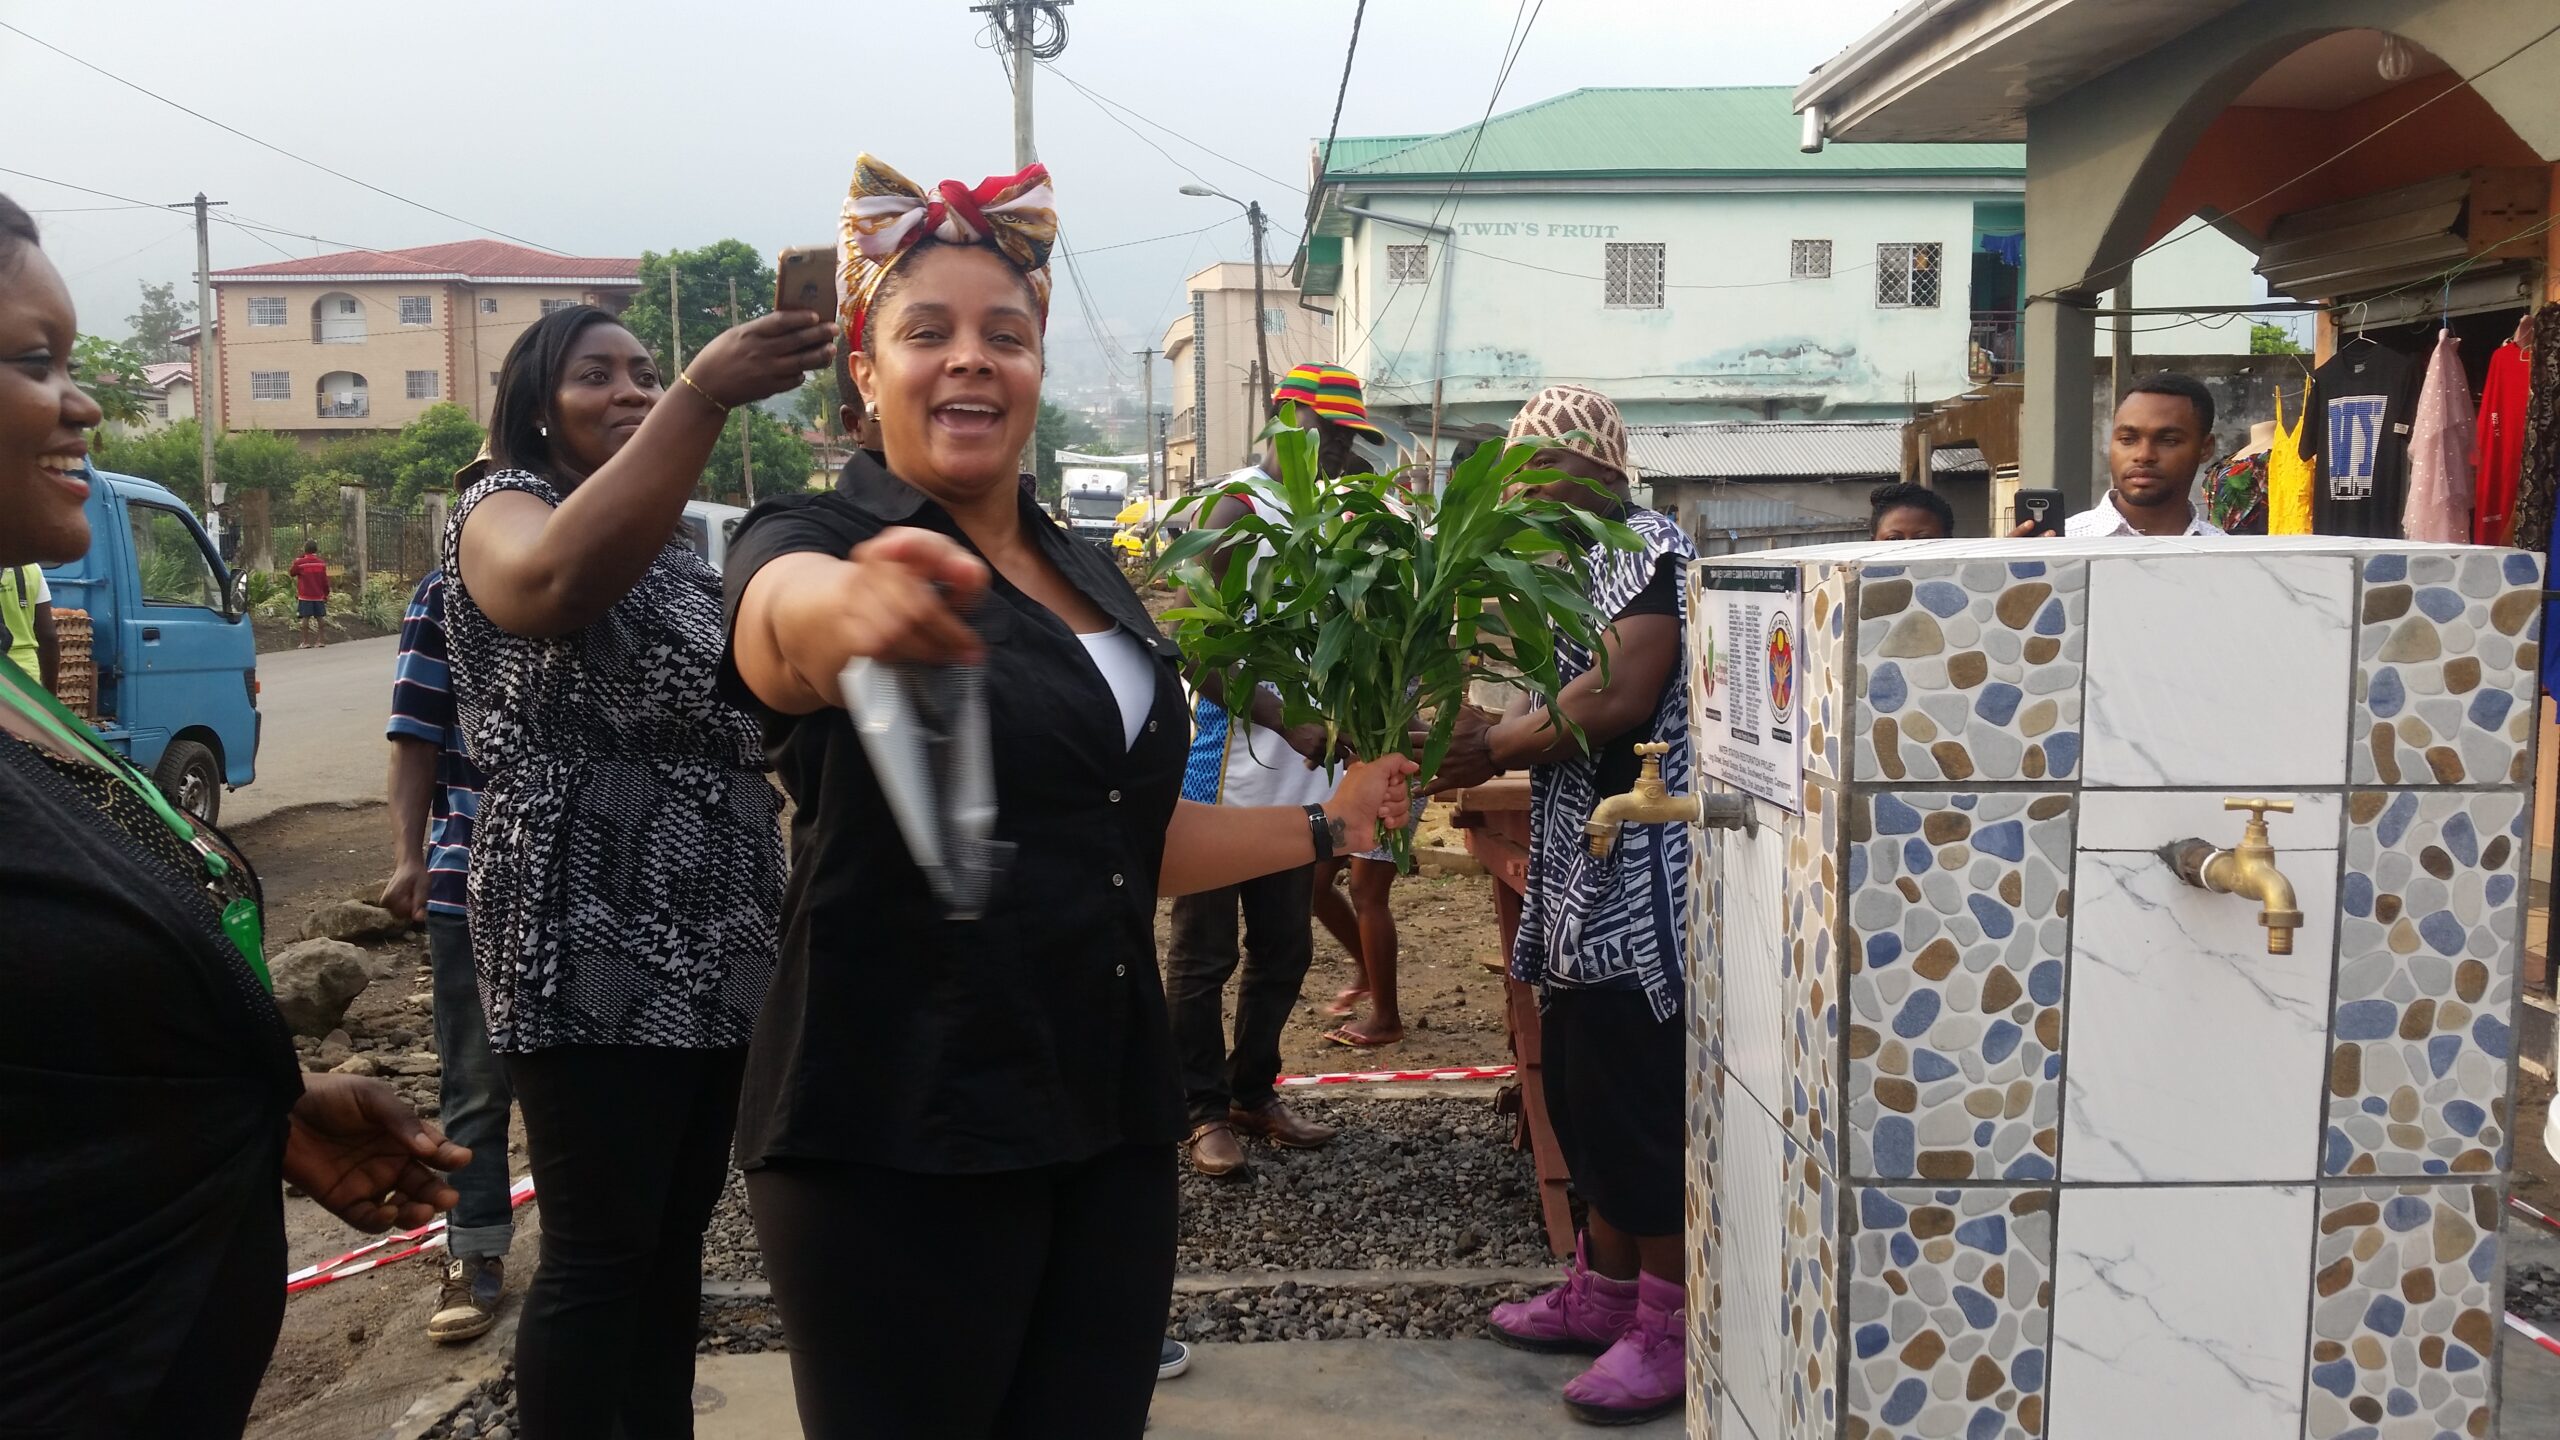 Mrs Renėe Duguė from Reborn and Rising (USA) Commissions the Water Station Restoration Project as Ruth Bisong, IPW Director looks on